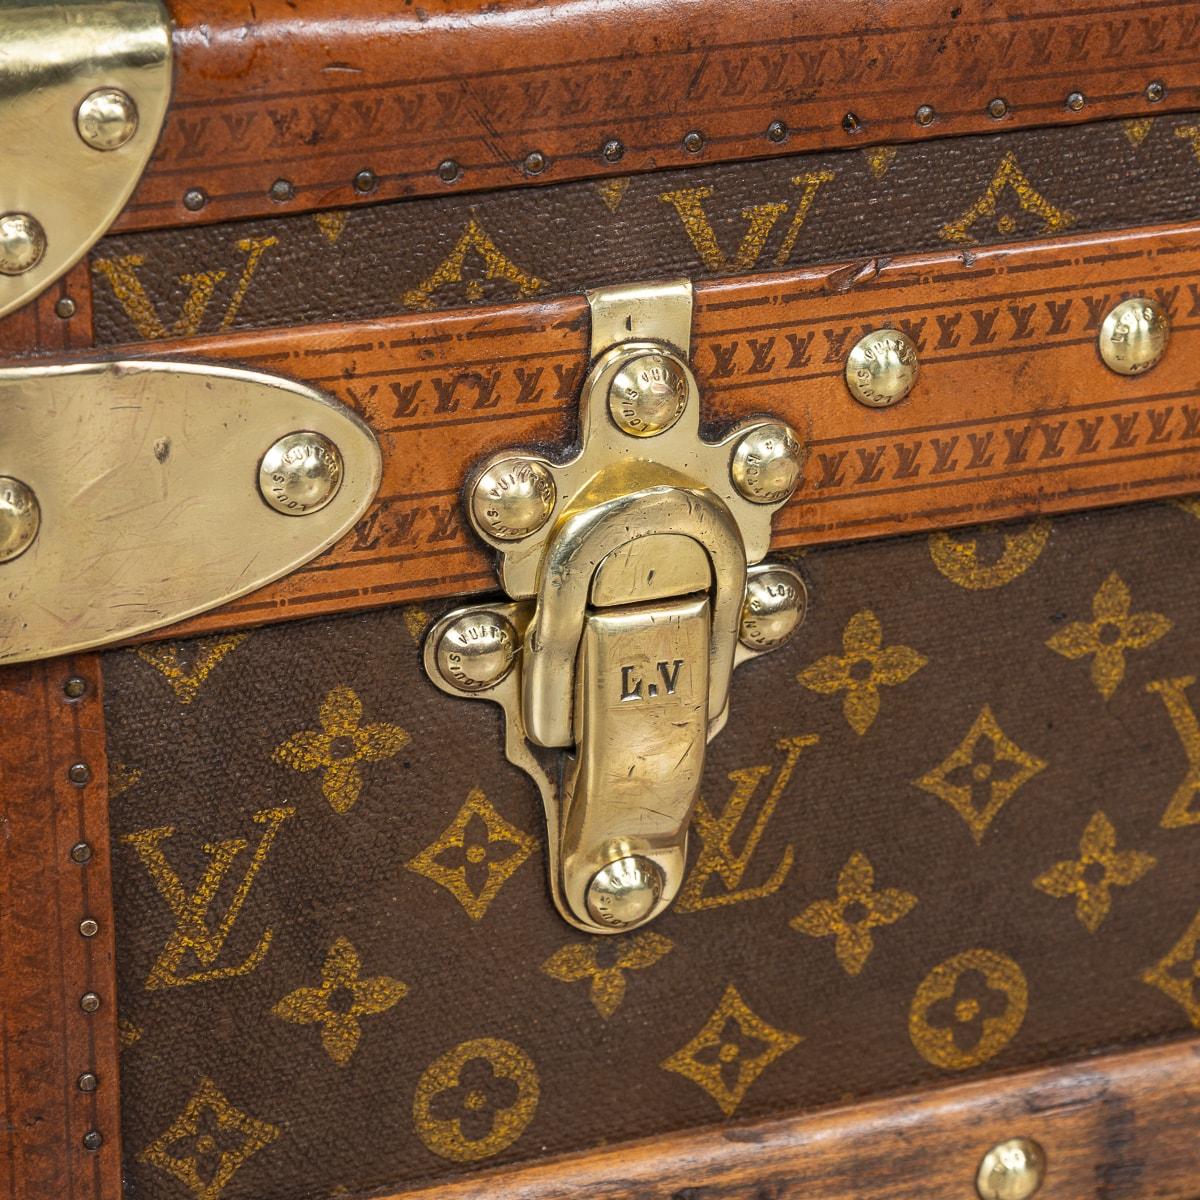 20th Century Louis Vuitton Cabin Trunk In Monogram Canvas, France c.1930 For Sale 8